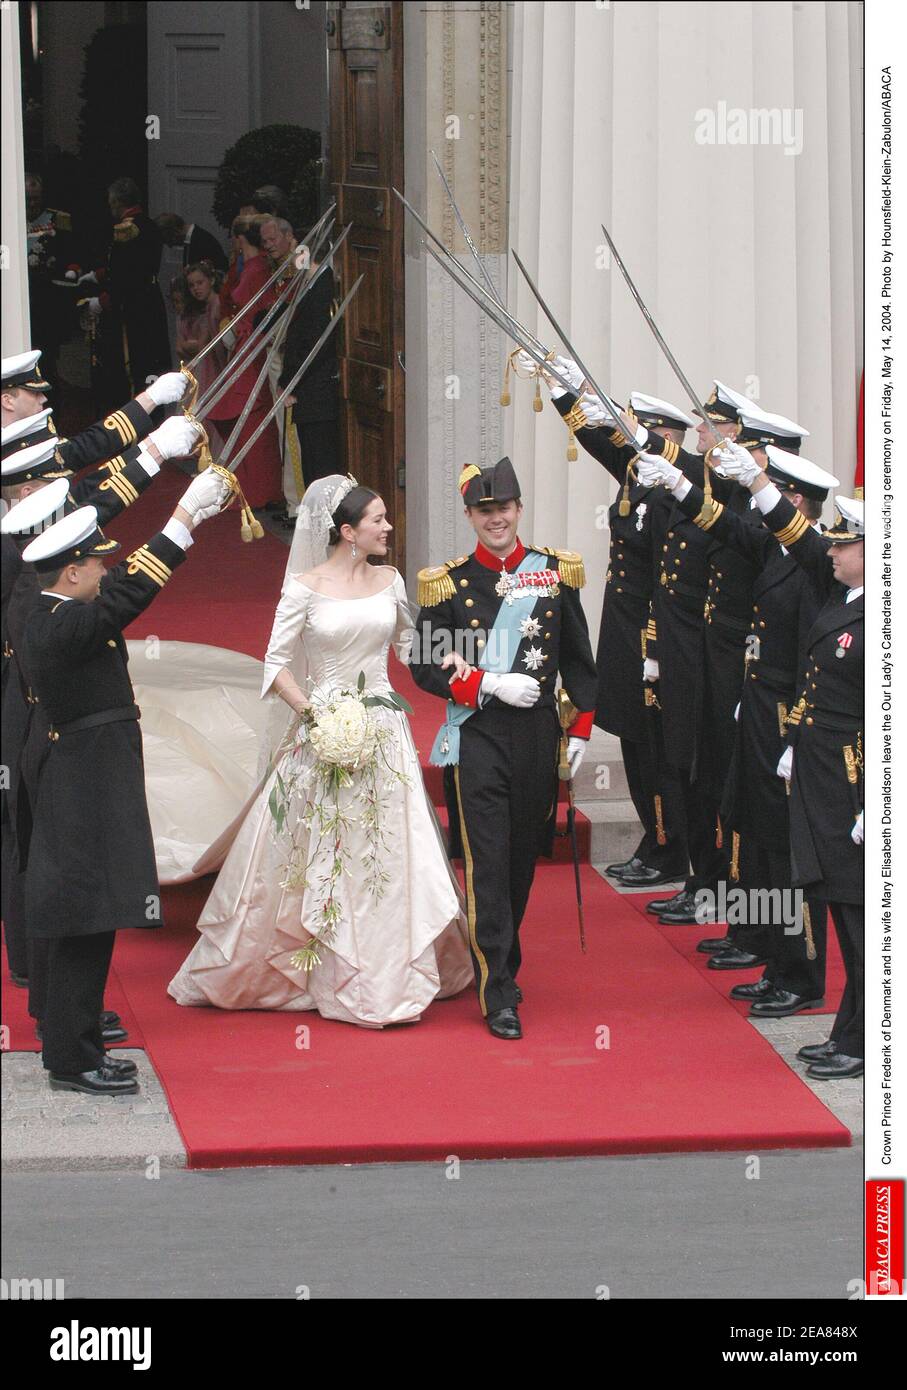 Crown Prince Frederik of Denmark and his wife Mary Elisabeth Donaldson leave the Our Lady's Cathedrale after the wedding ceremony on Friday, May 14, 2004. Photo by Hounsfield-Klein-Zabulon/ABACA Stock Photo